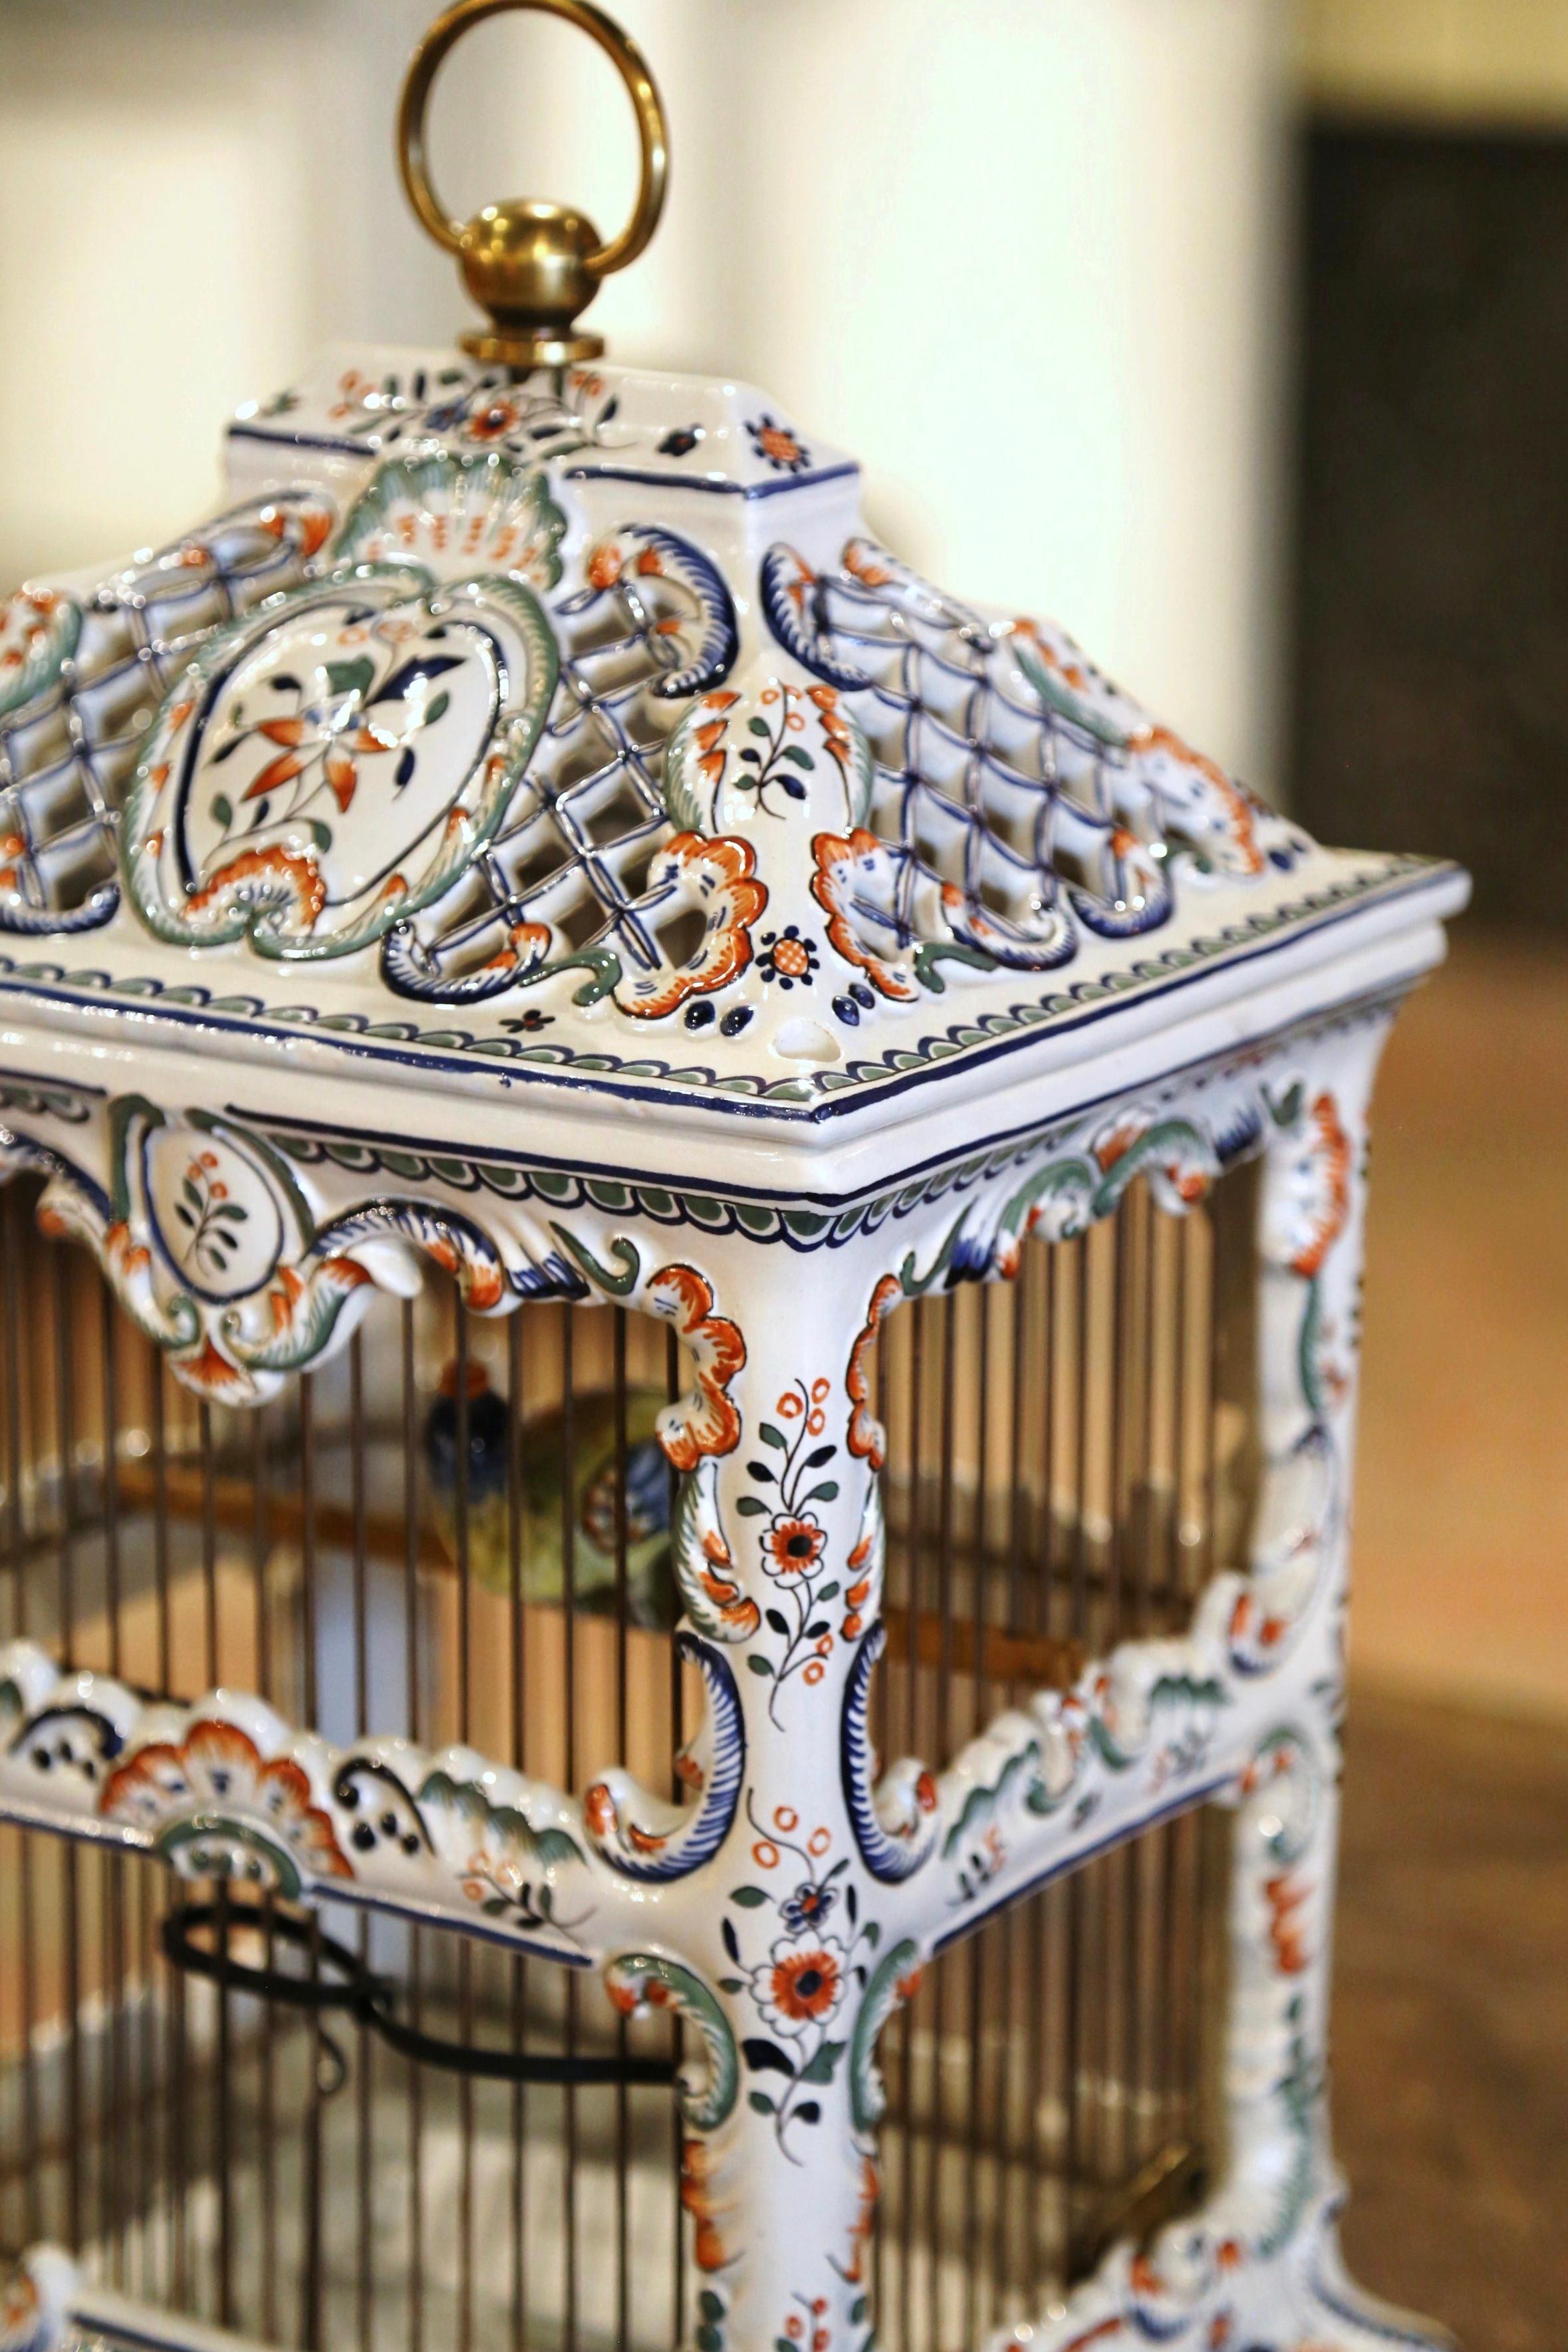 Ceramic Midcentury French Decorative Hand Painted Porcelain Birdcage from Normandy